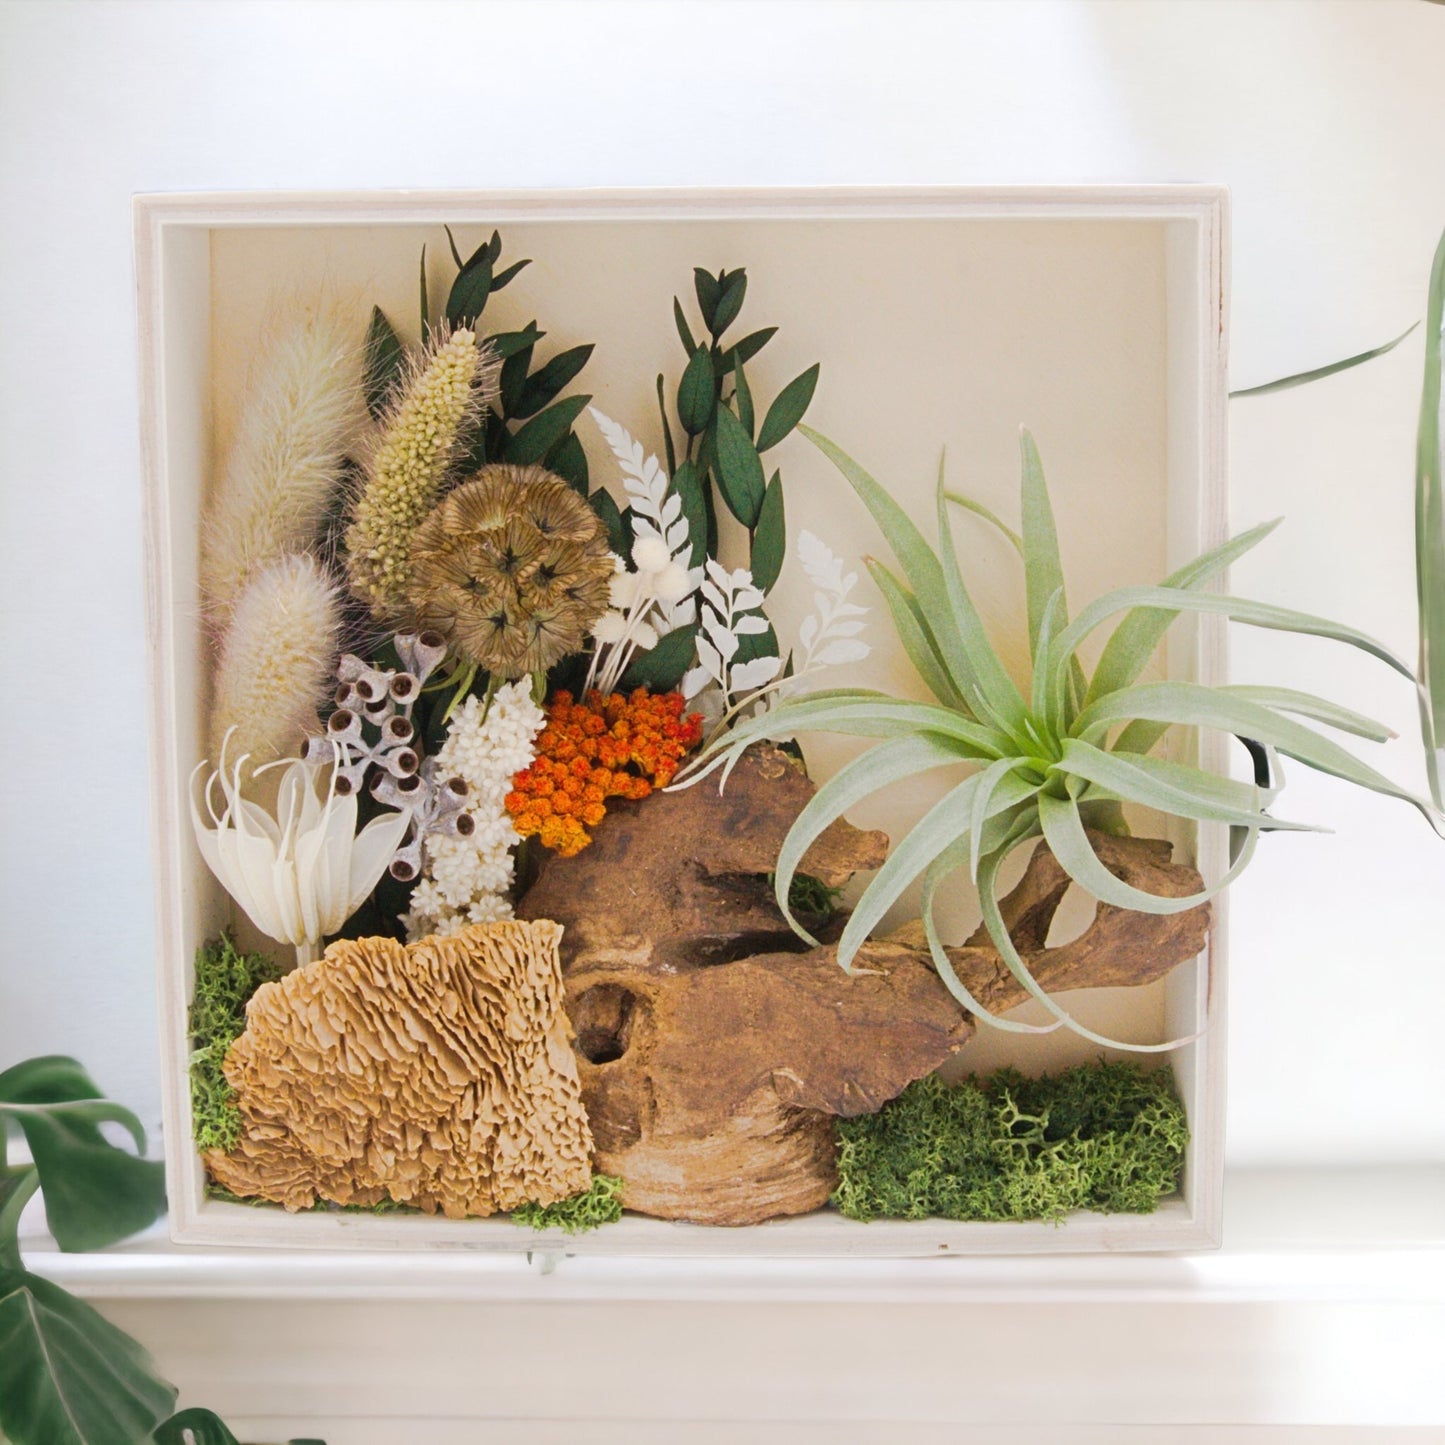 Square wooden box frame filled with dried flowers, wood, moss, dried mushrooms and an airplant